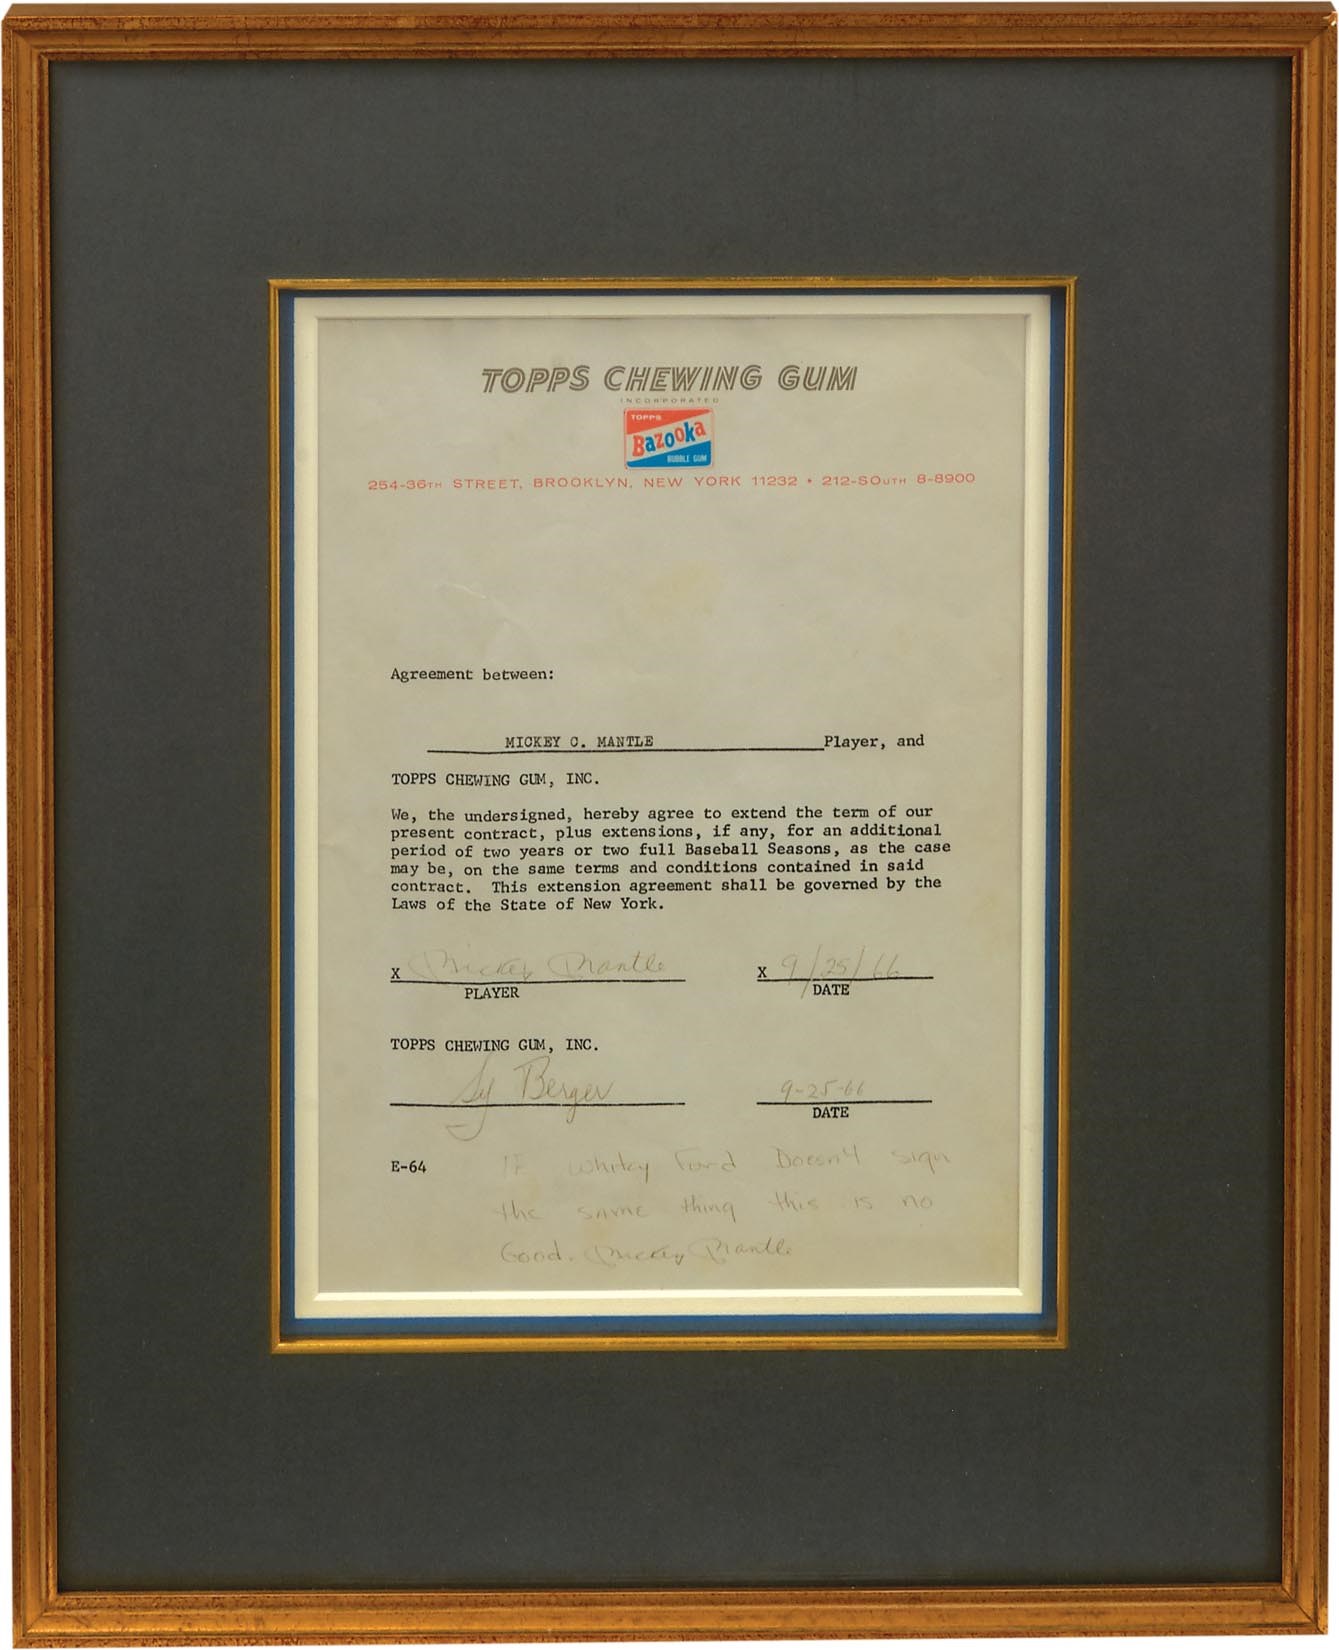 Mantle and Maris - 1966 Mickey Mantle Topps Signed Baseball Card Contract (PSA)